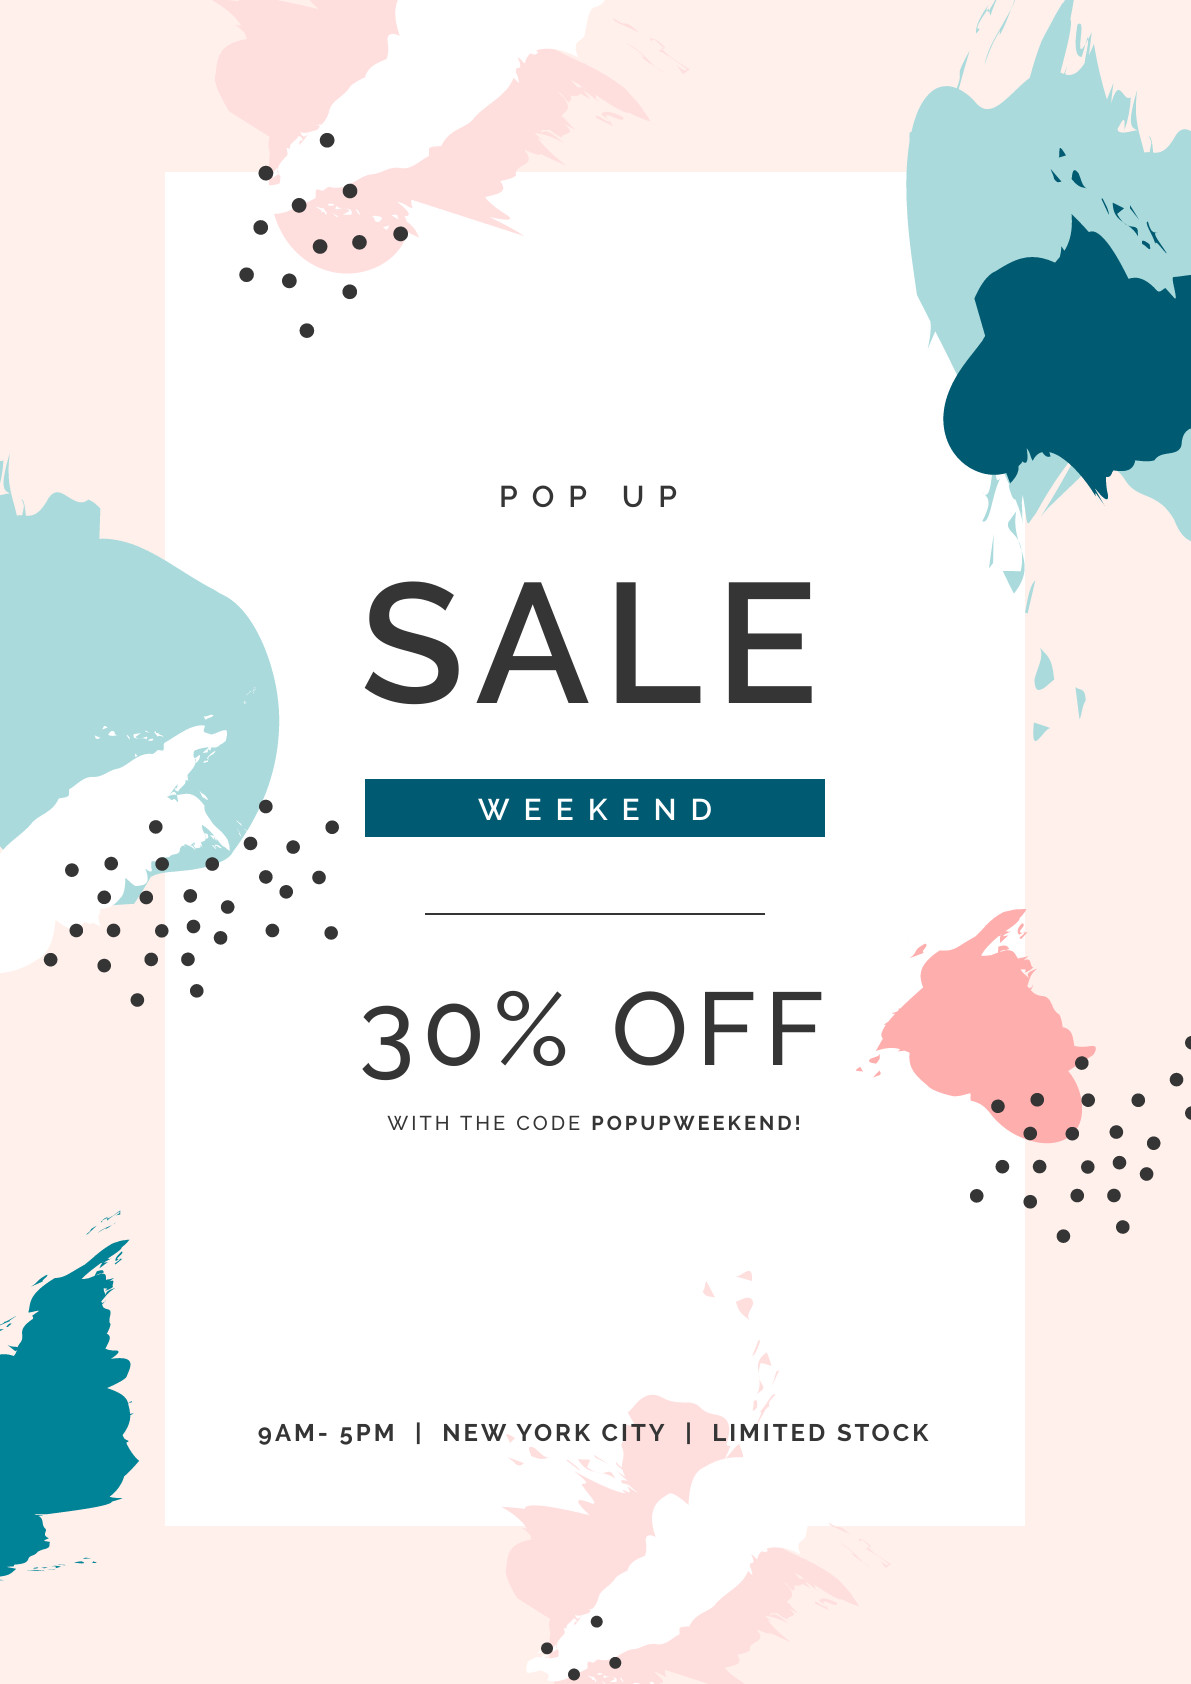 Pop Up Sale – Poster Template 1191x1684